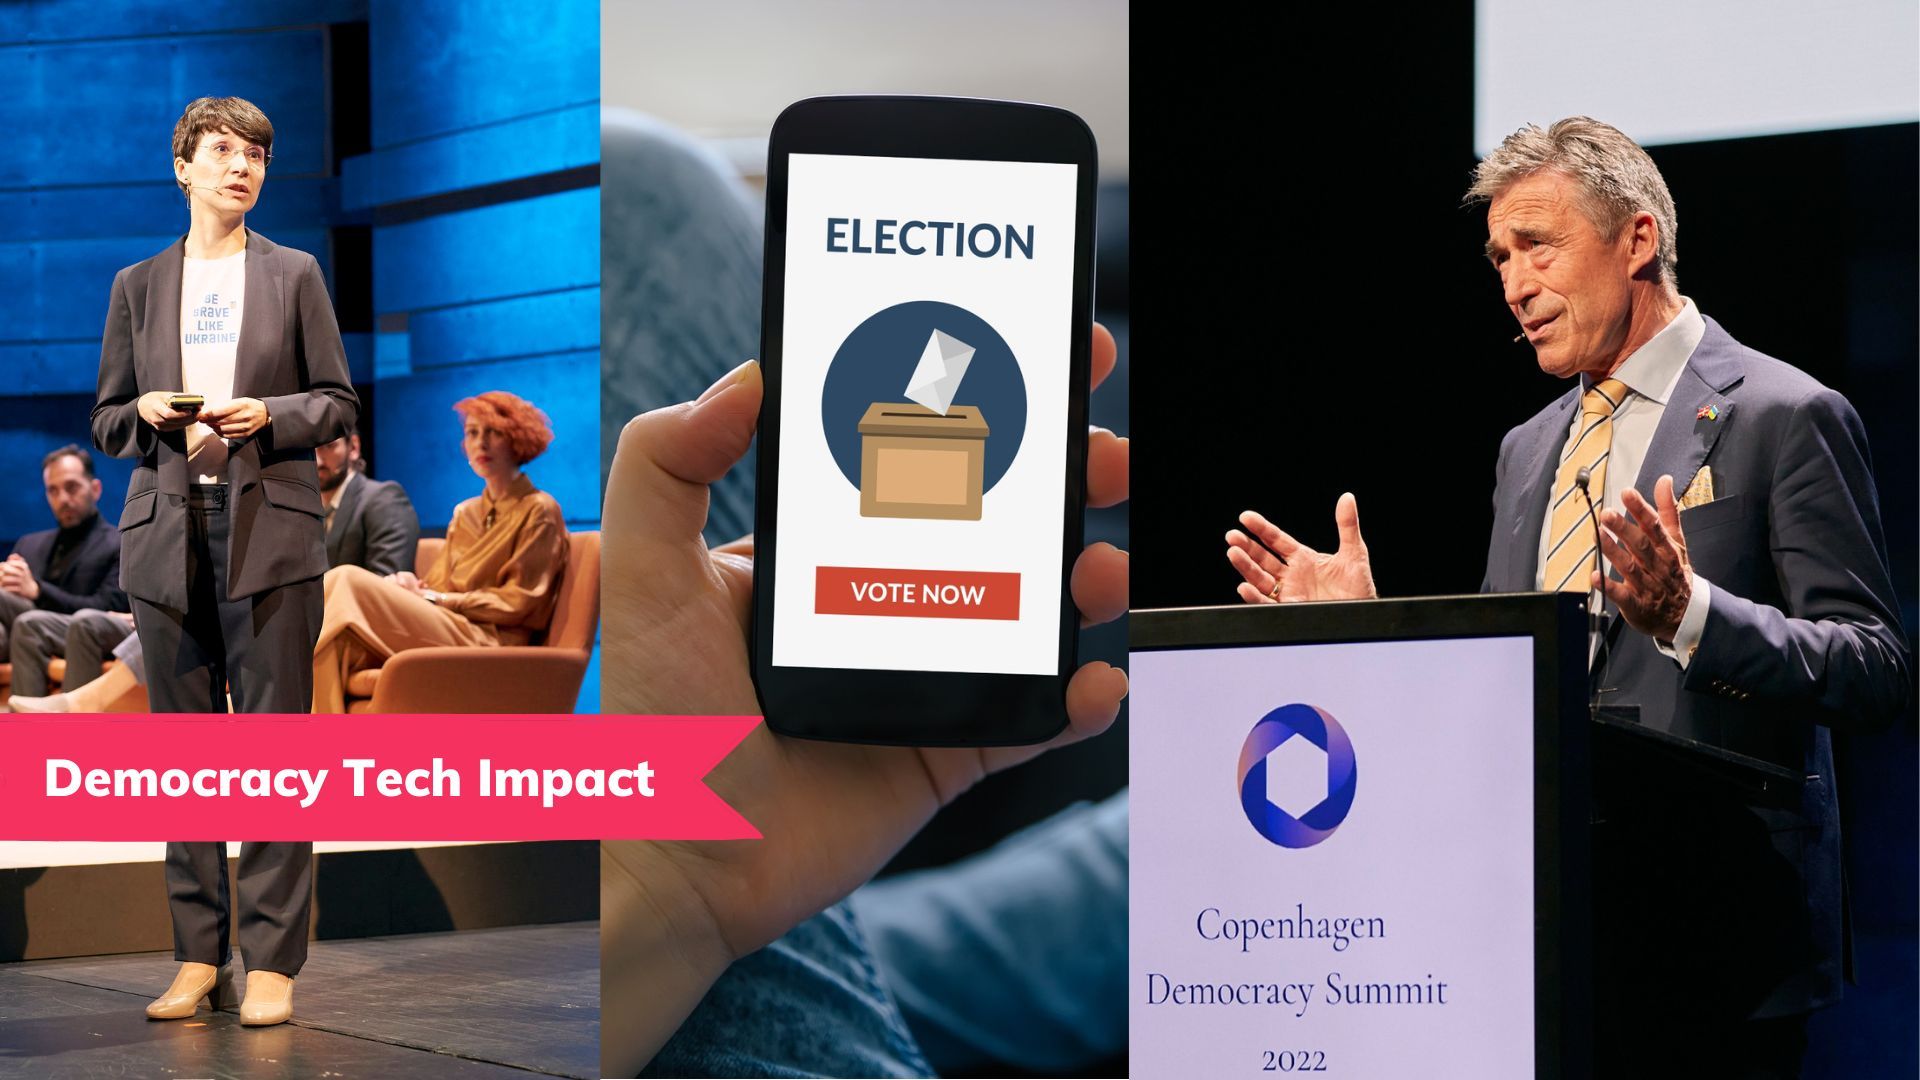 📱 These people are using technology to strengthen democracy